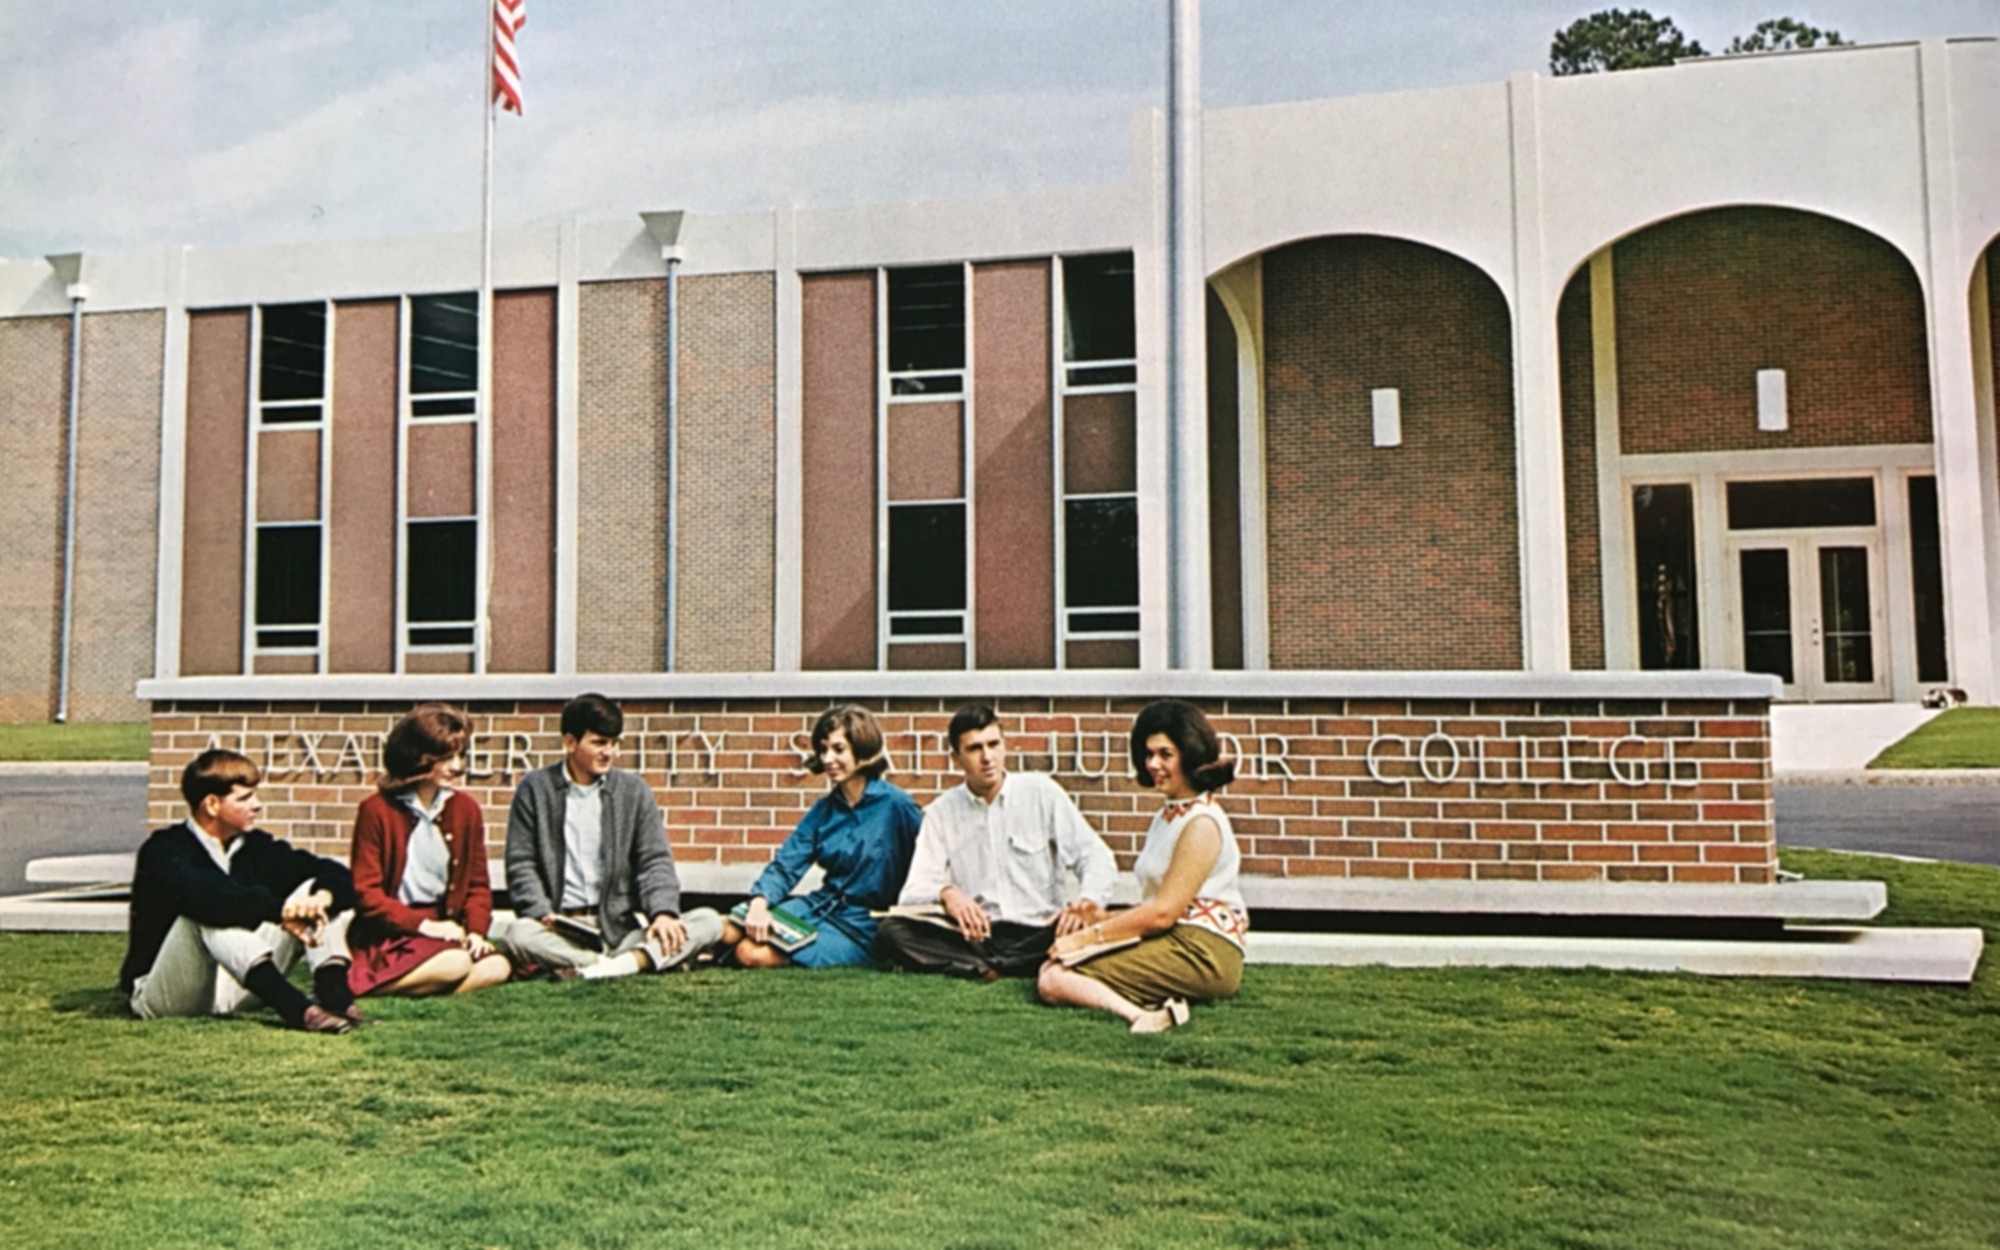 History of CACC | Central Alabama Community College